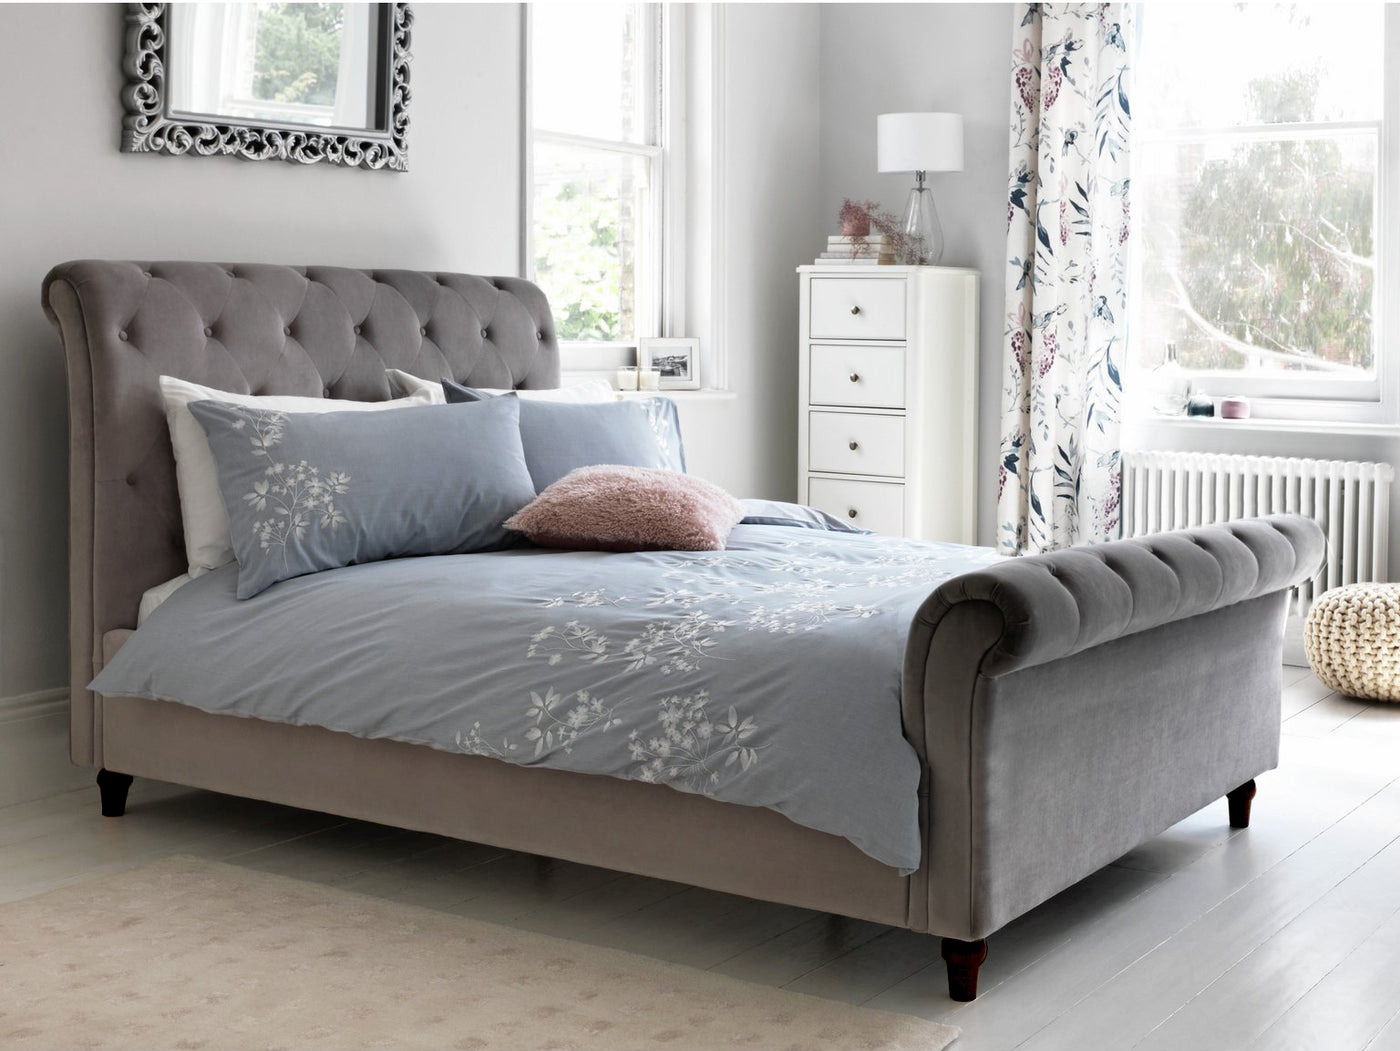 Chesterfield Sleigh Bed Frames 